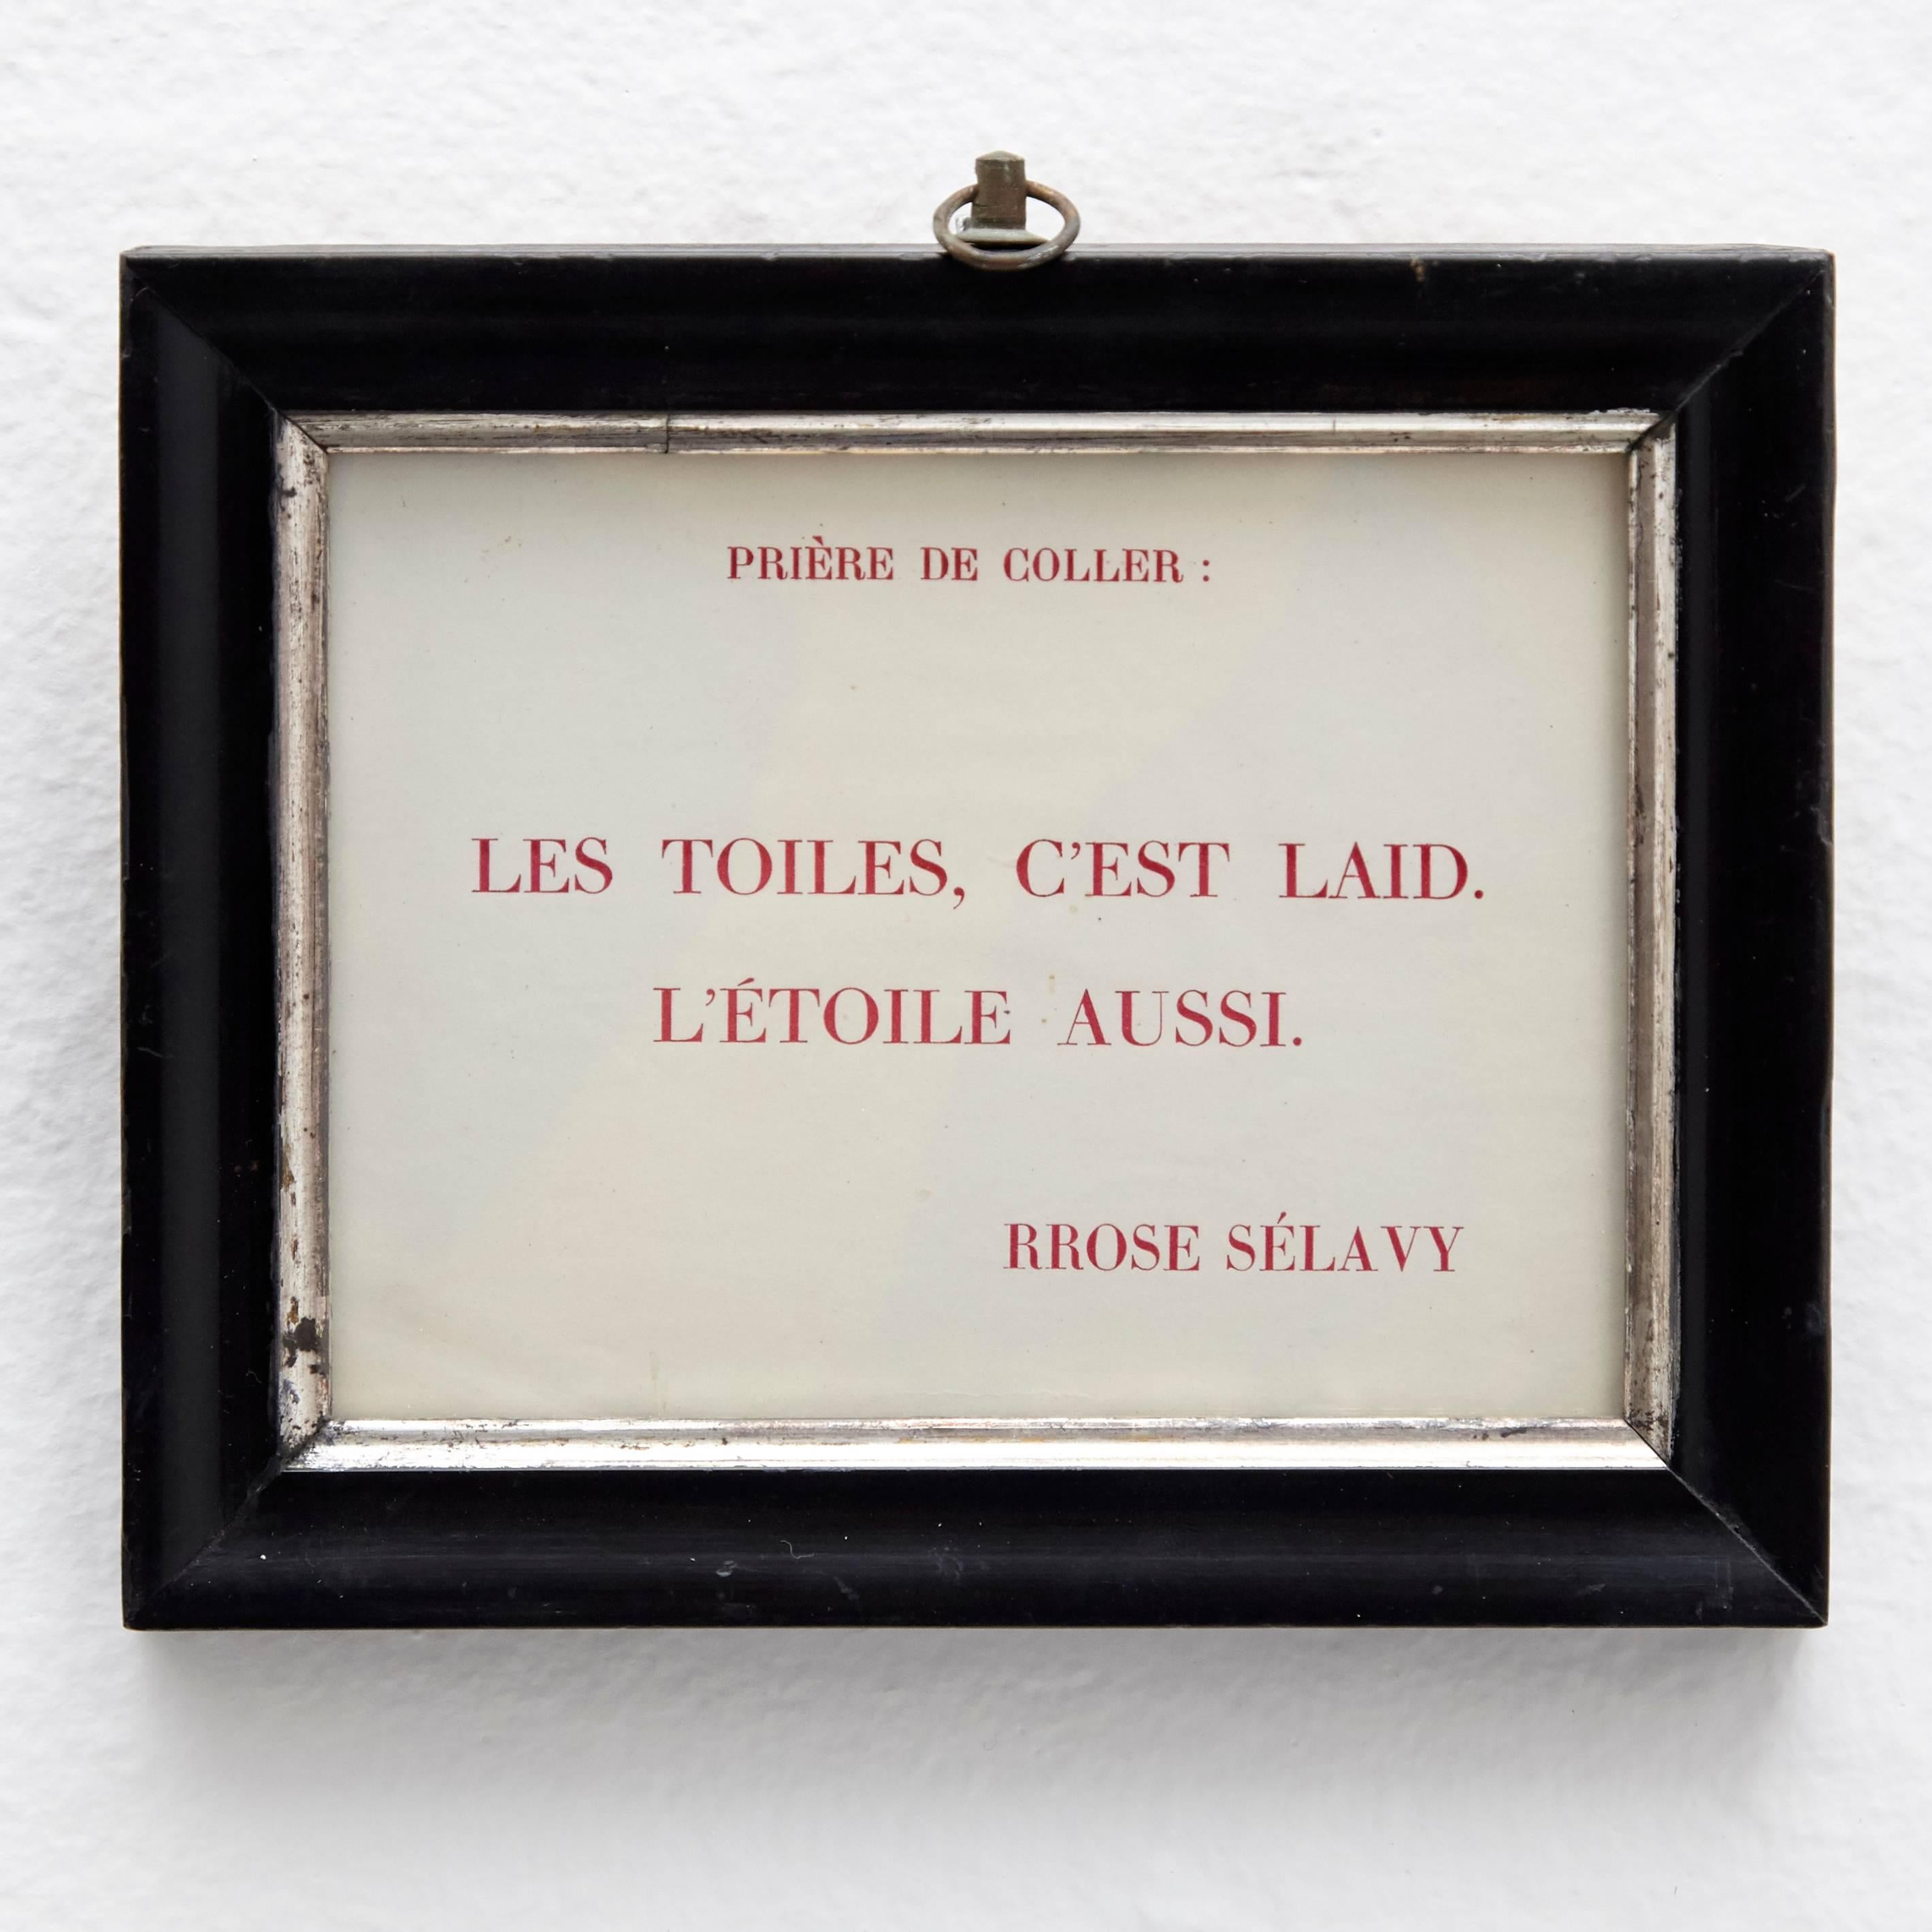 Adhesive Poster for the opening of the Etoile Scellée gallery on 5 December 1952 in Paris.

It bears the printed signature Rrose Sélavy.

Framed on a 19th century frame.

Henri-Robert-Marcel Duchamp (French 28 July 1887 – 2 October 1968) was a